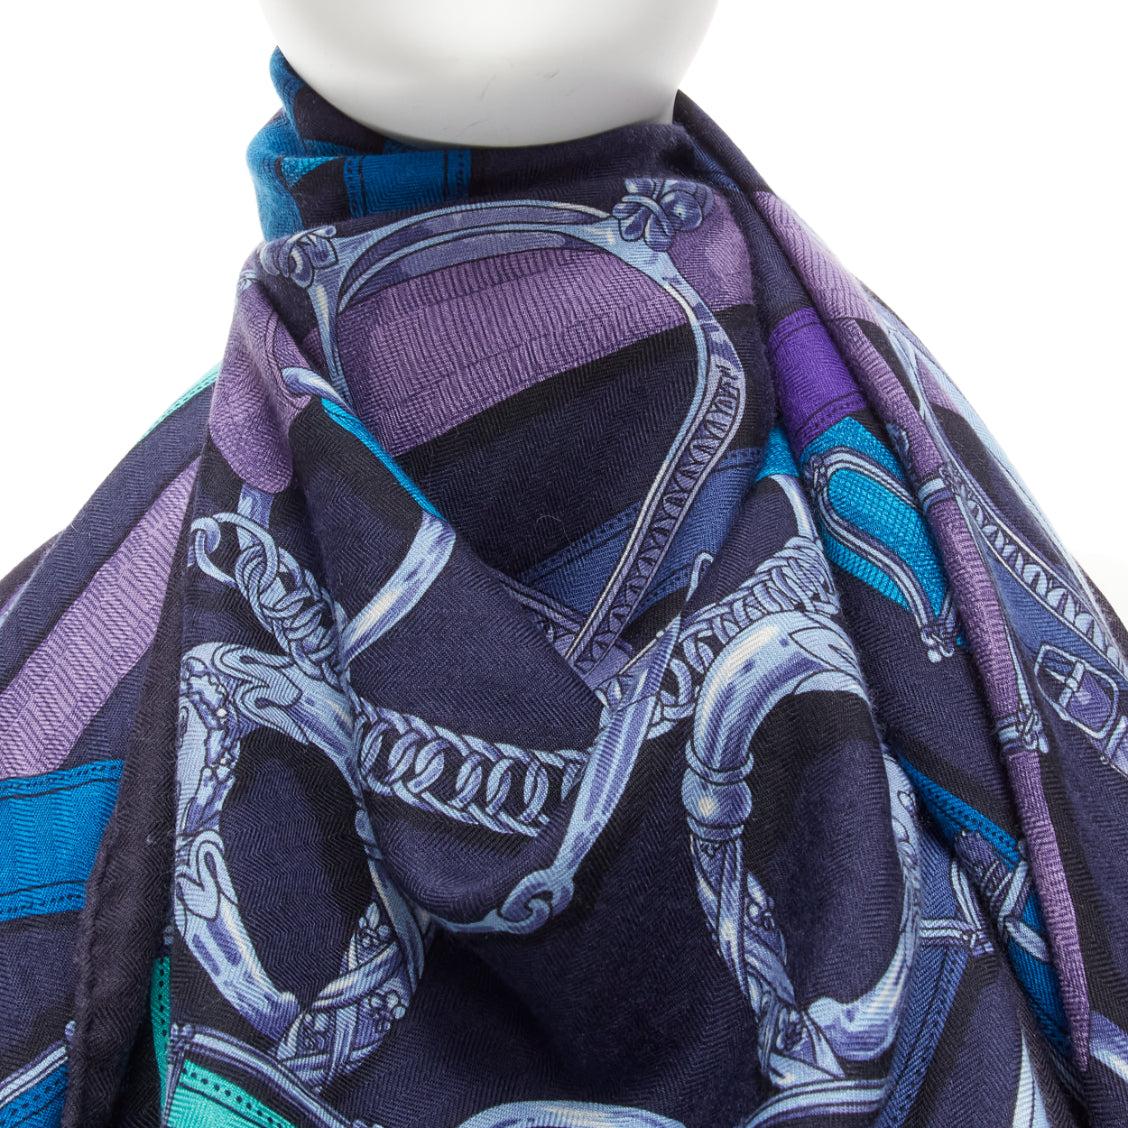 HERMES Robe du Soir navy blue chain link print cashmere silk scarf
Reference: SNKO/A00358
Brand: Hermes
Collection: Robe du Soir
Material: Cashmere, Silk
Color: Blue, Multicolour
Pattern: Abstract
Made in: France

CONDITION:
Condition: Excellent,